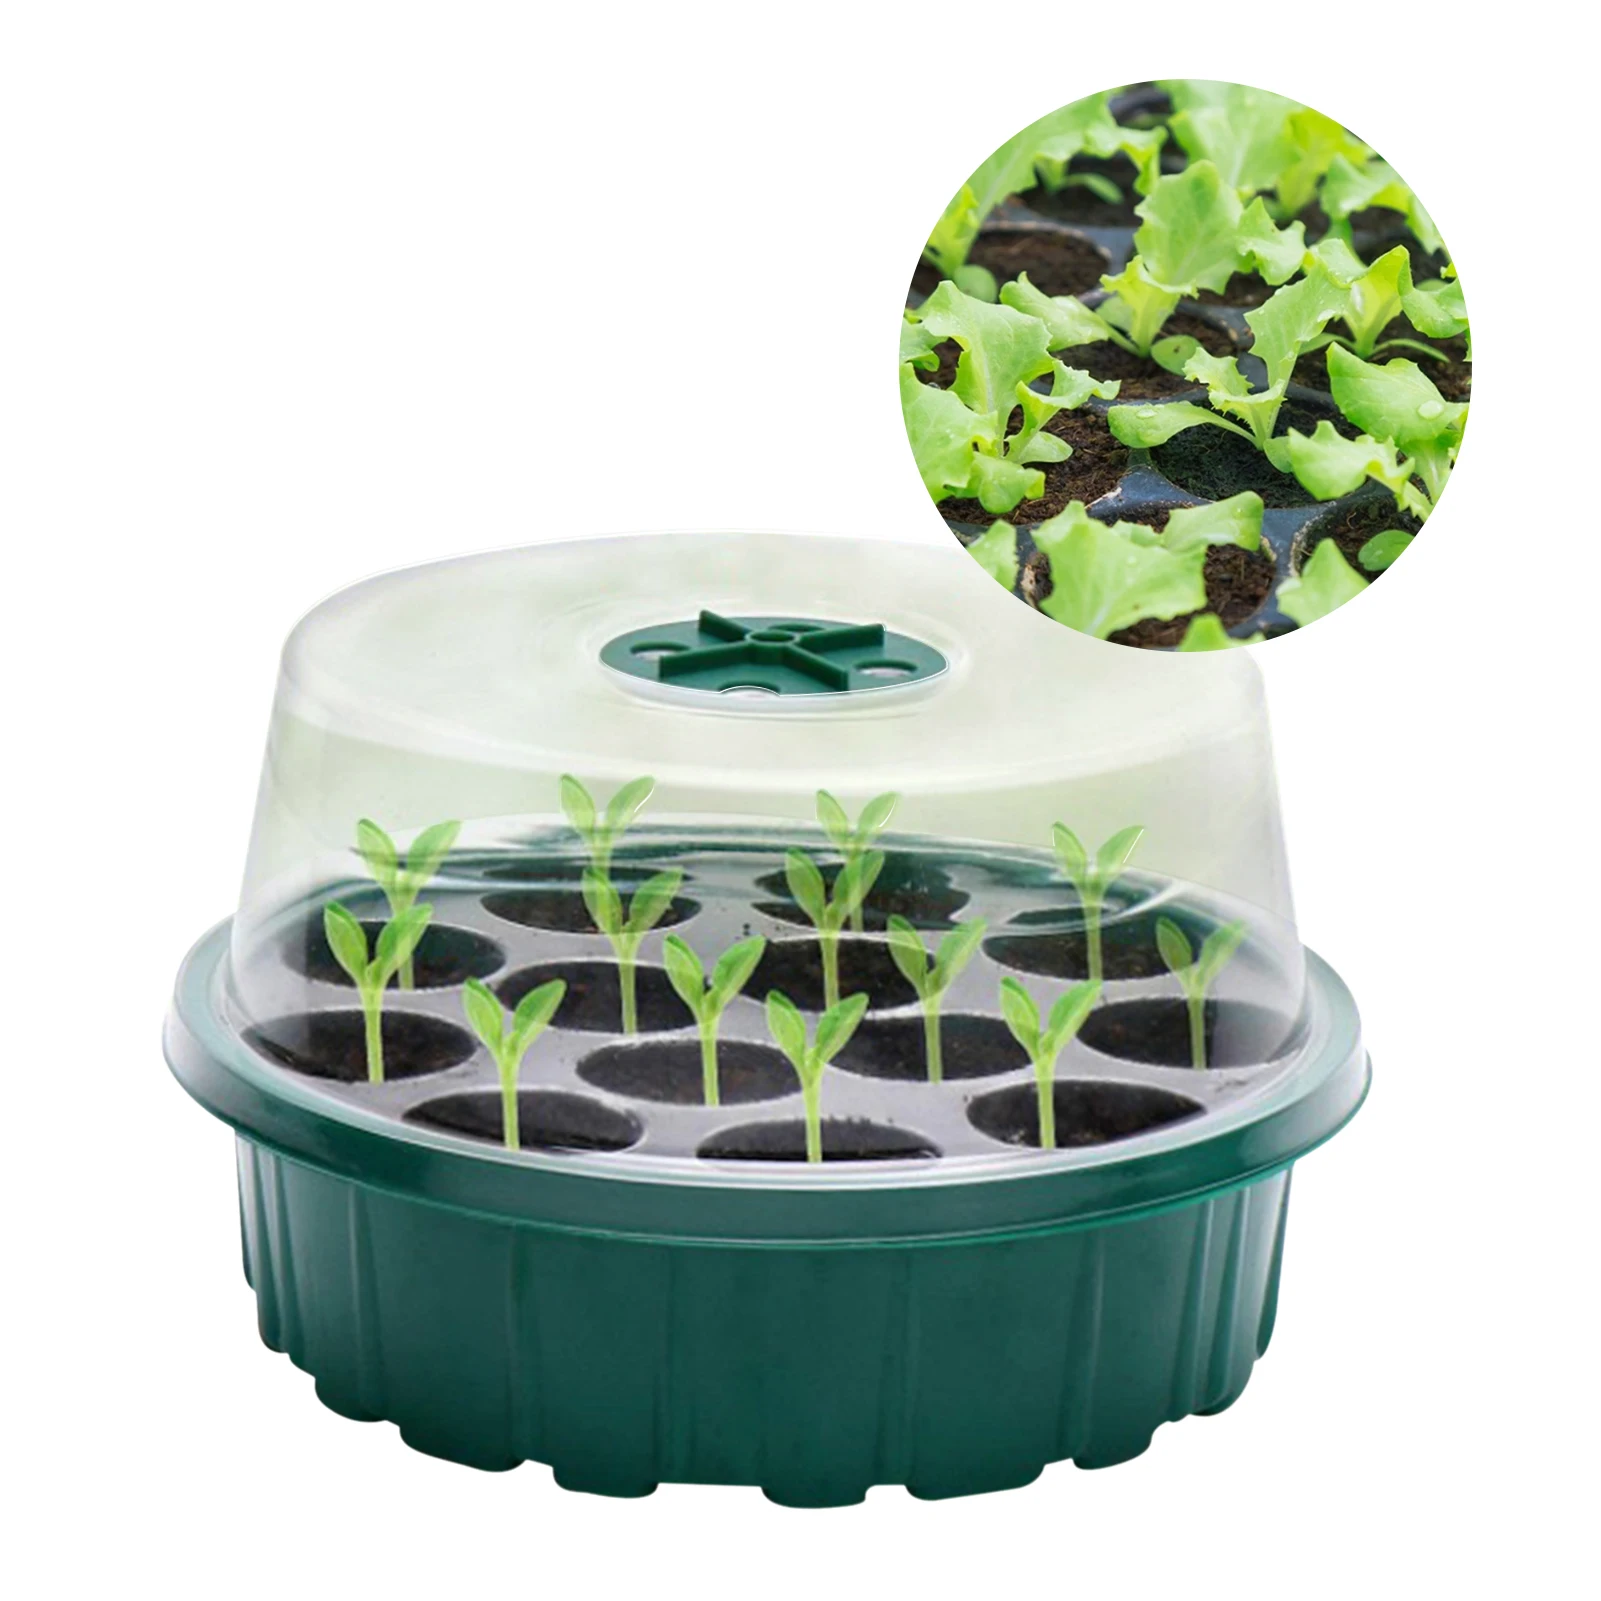 

Seed Starter Kit Plant Seeds Grow Box Seedling Trays Germination Box With Dome And Base Plastic Nursery Pots